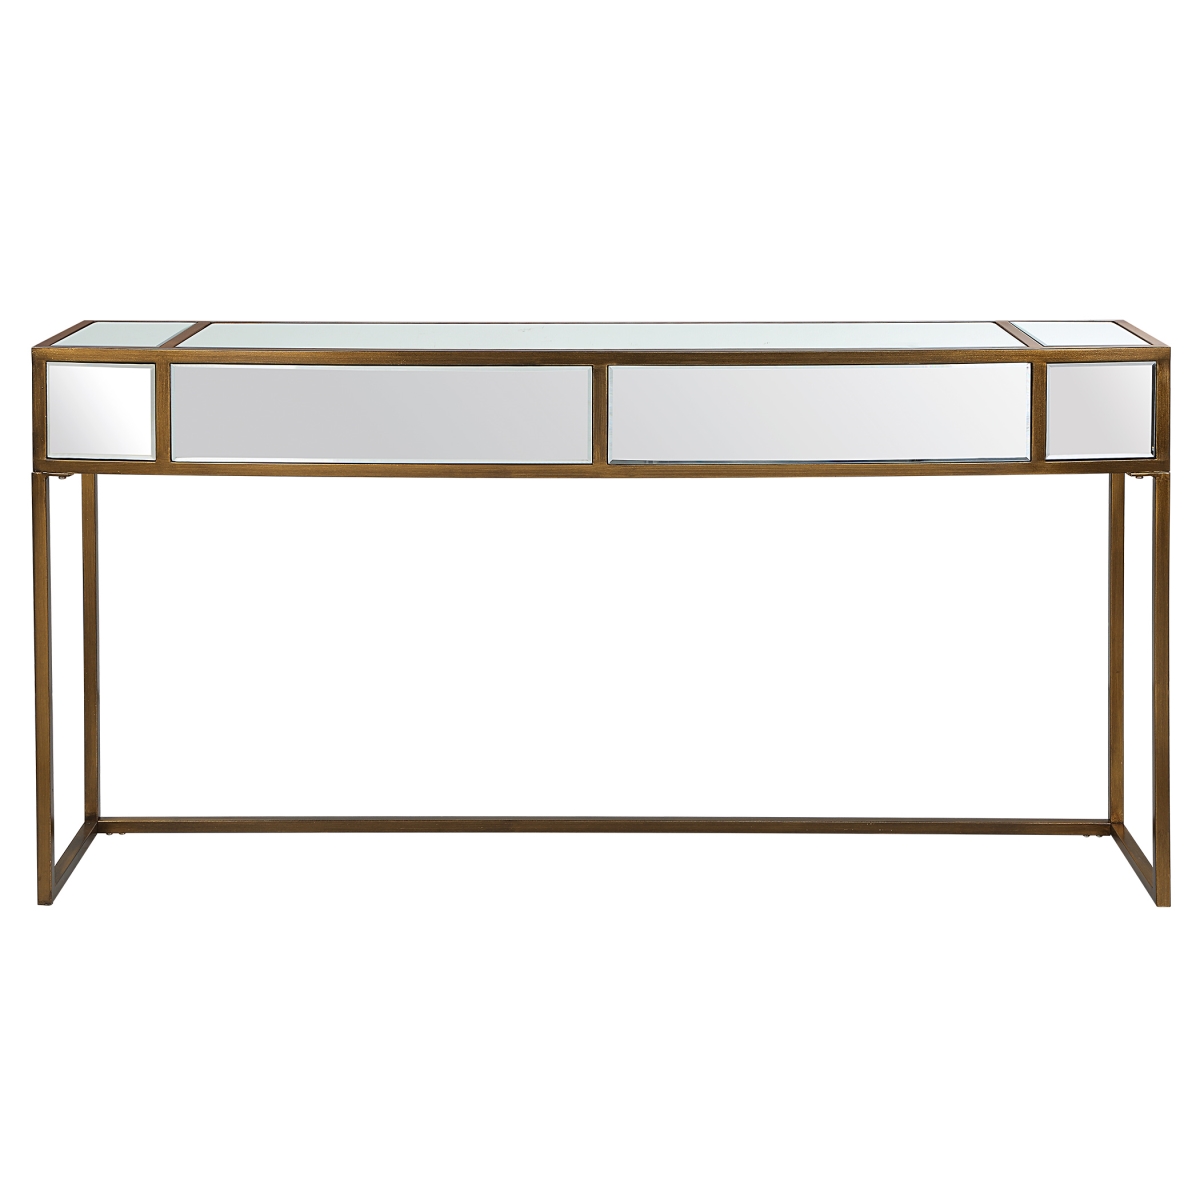 Picture of Uttermost 25286 62 in. Reflect Wall Mirrored Console Table, Brushed Aged Gold